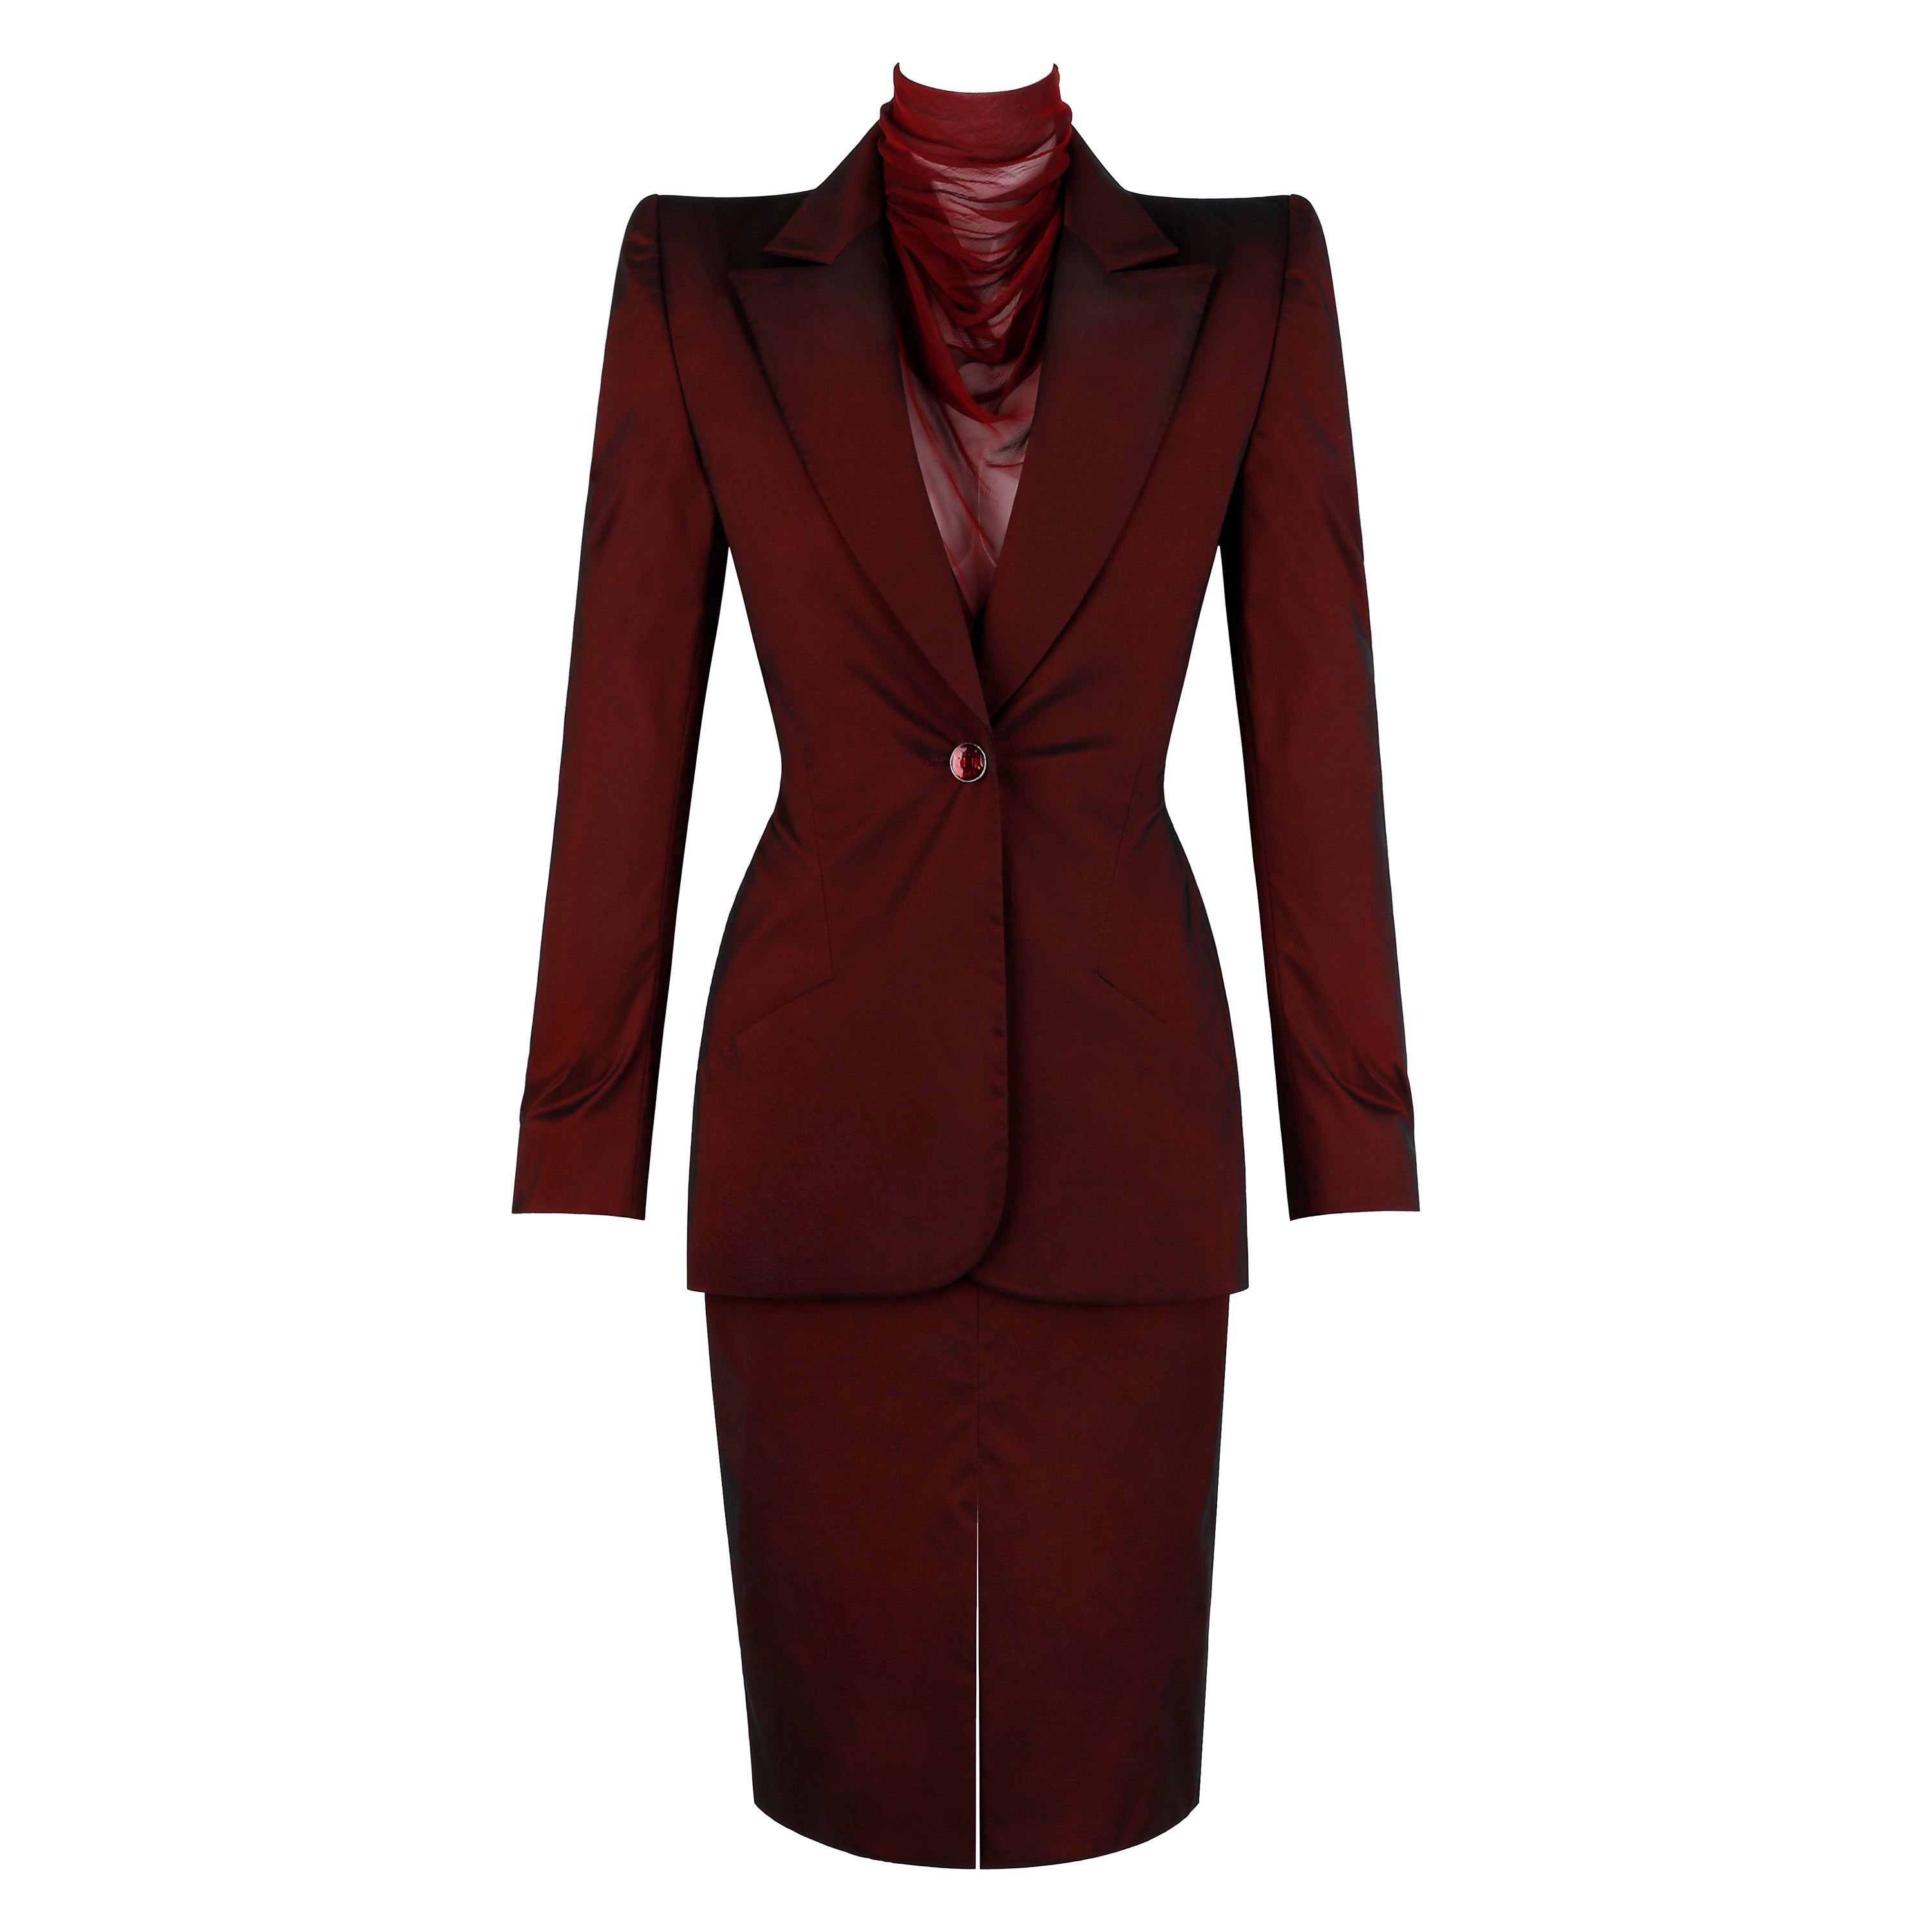 Givenchy Couture Alexander McQueen F/W 1998 Sheer Mock Neck Dress & Blazer Suit For Sale